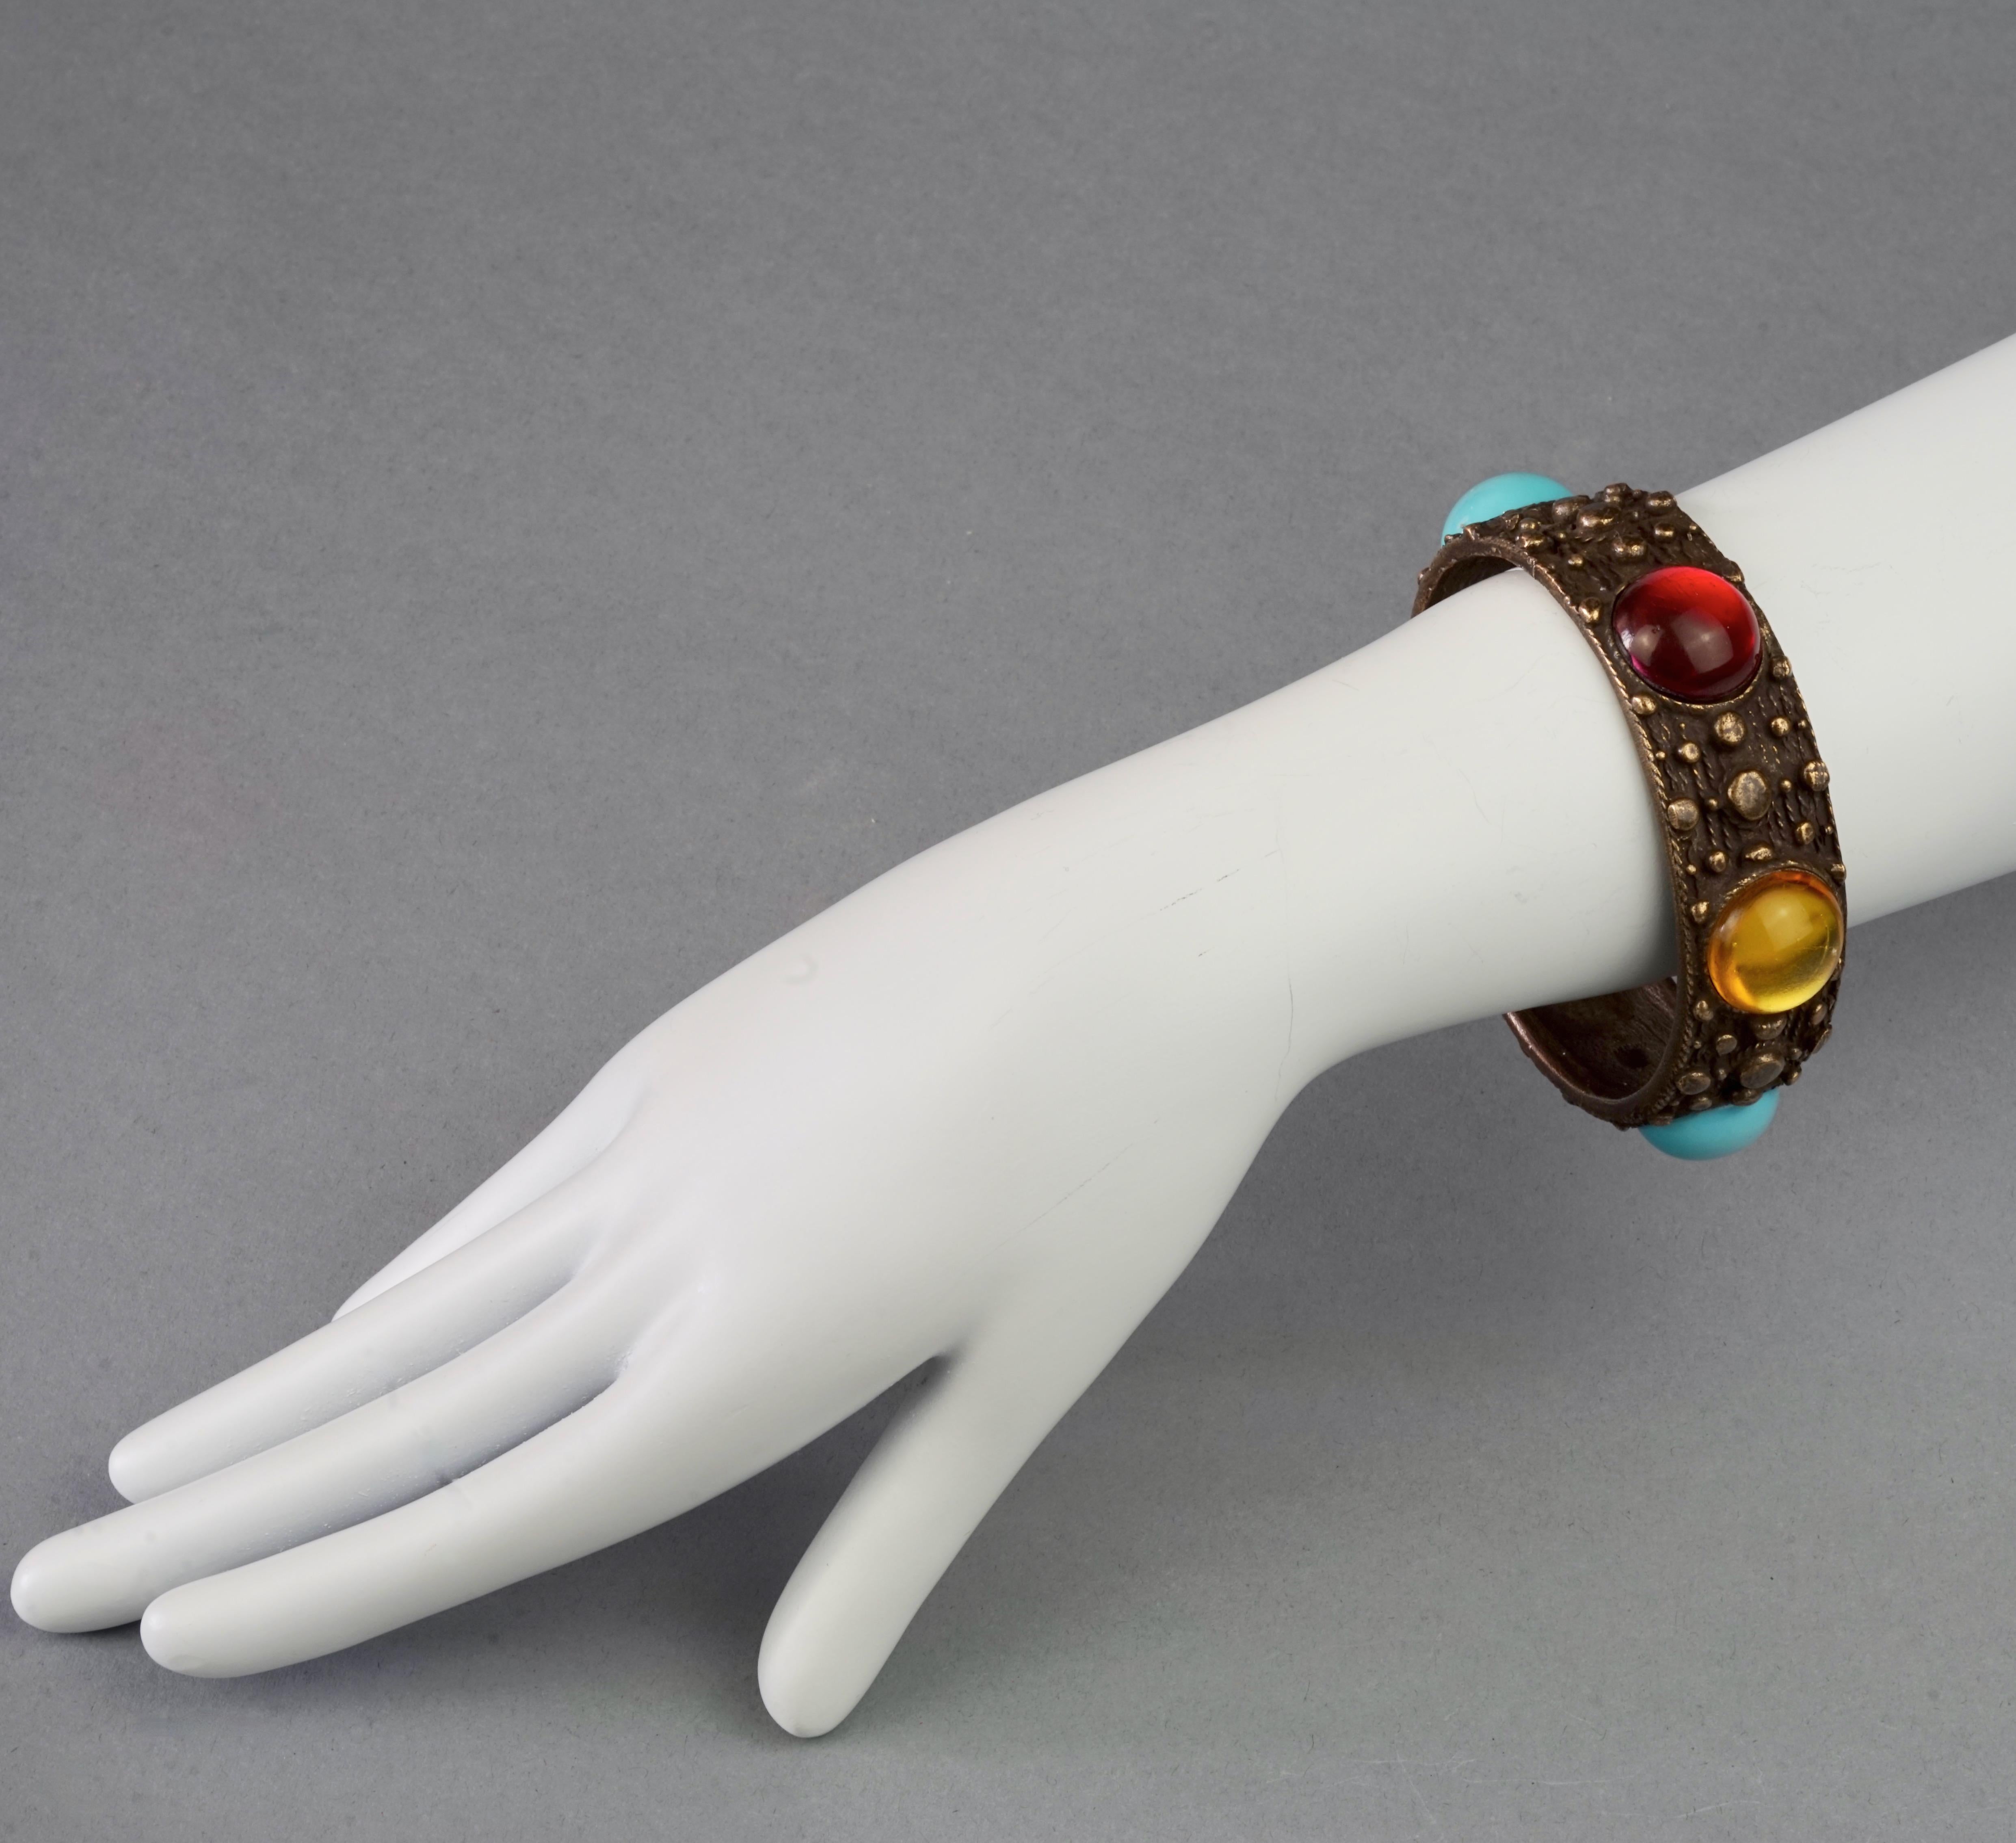 Vintage JEAN PAUL GAULTIER Ethnic Glass Cabochons Cuff Bracelet

Measurements:
Height: 0.86 inch (2.2 cm)
Inner Circumference: 8.18 inches (20.8 cm)

Features:
- 100% Authentic JEAN PAUL GAULTIER.
- Ethnic style cuff bracelet with multicolour glass